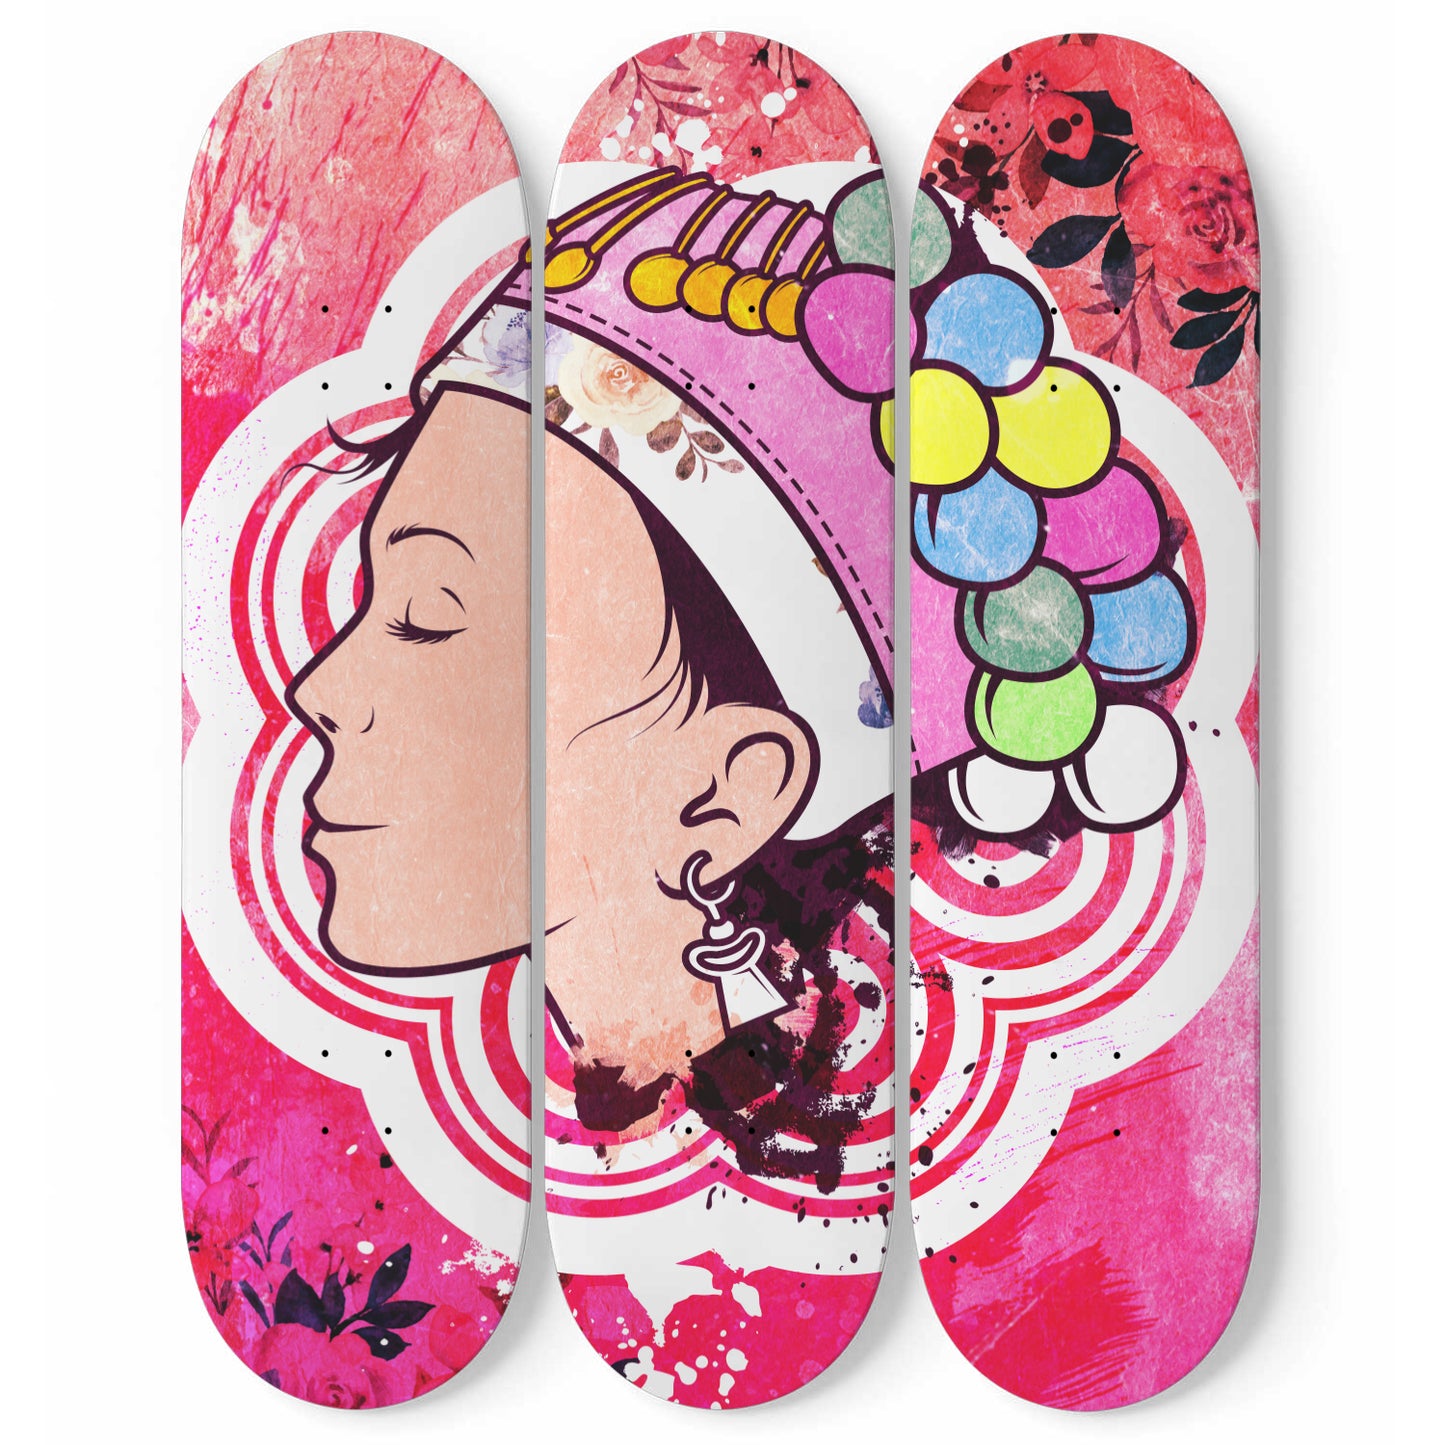 Hmong girl with Traditional Hat - 3 Piece Skateboard Wall Art